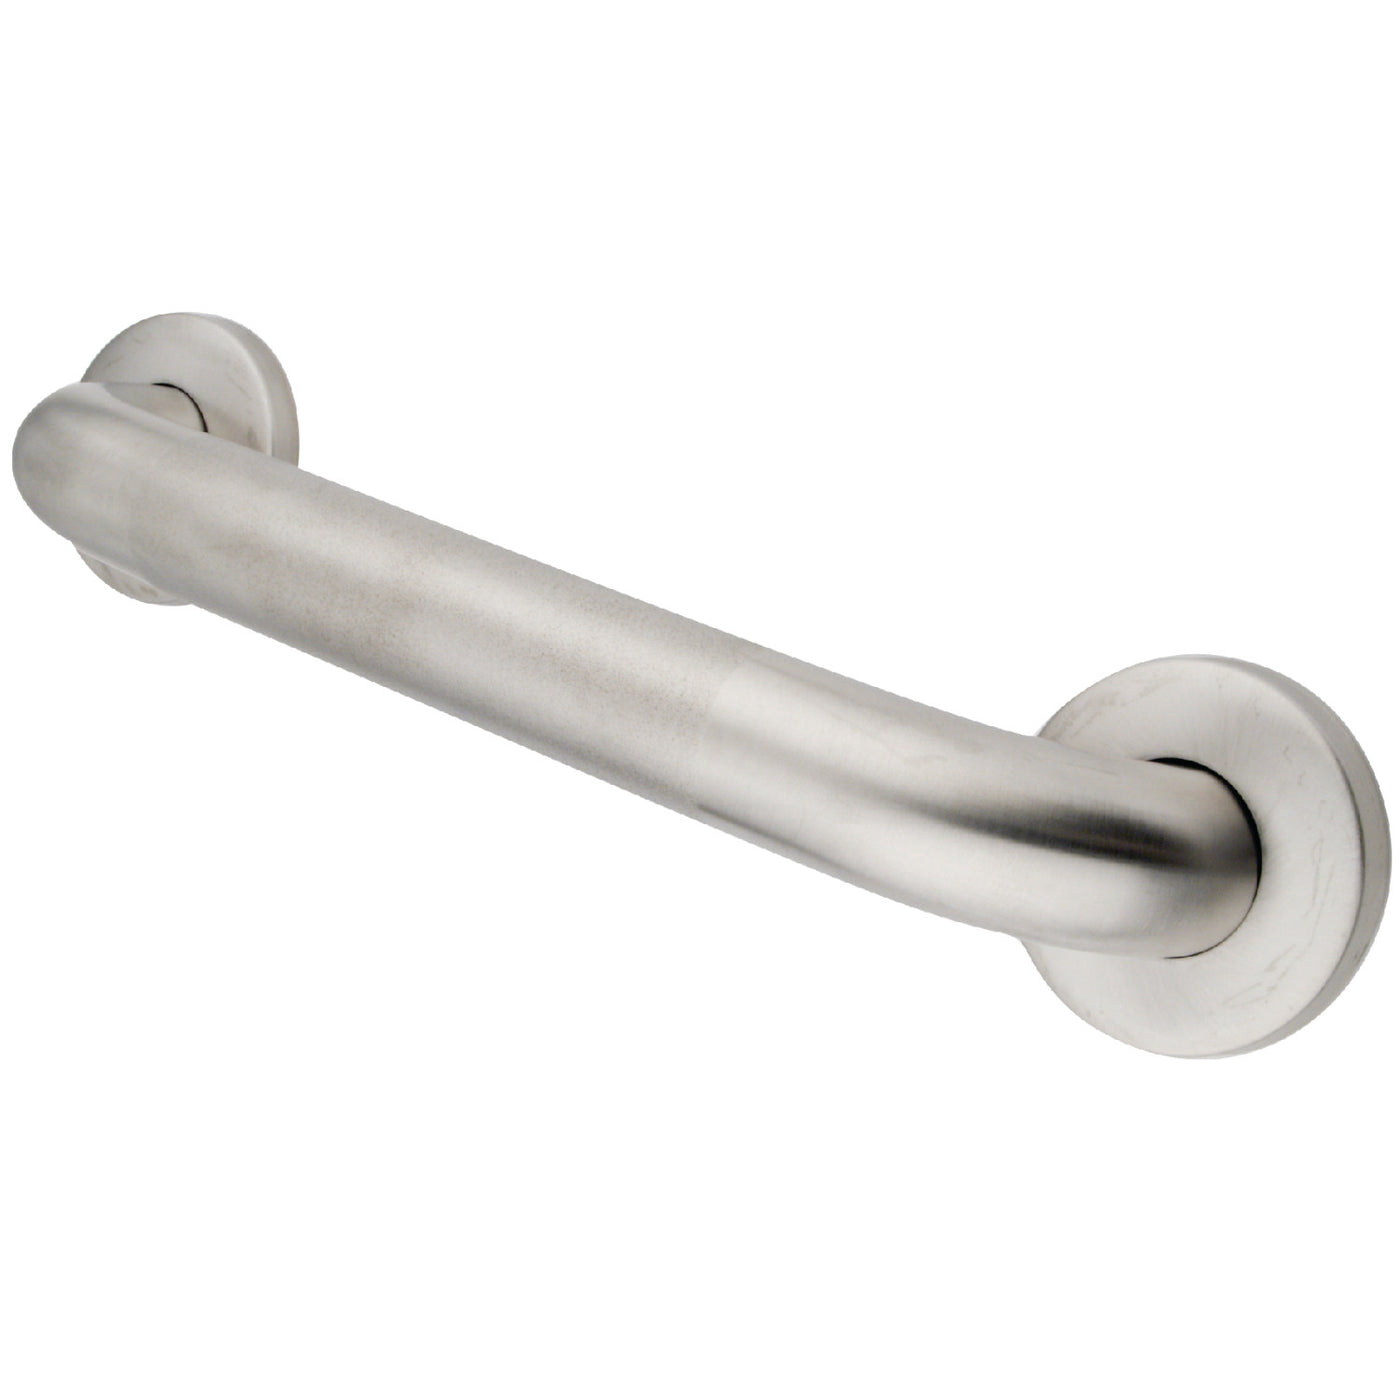 Elements of Design EGB1218CT 18-Inch Stainless Steel Grab Bar, Brushed